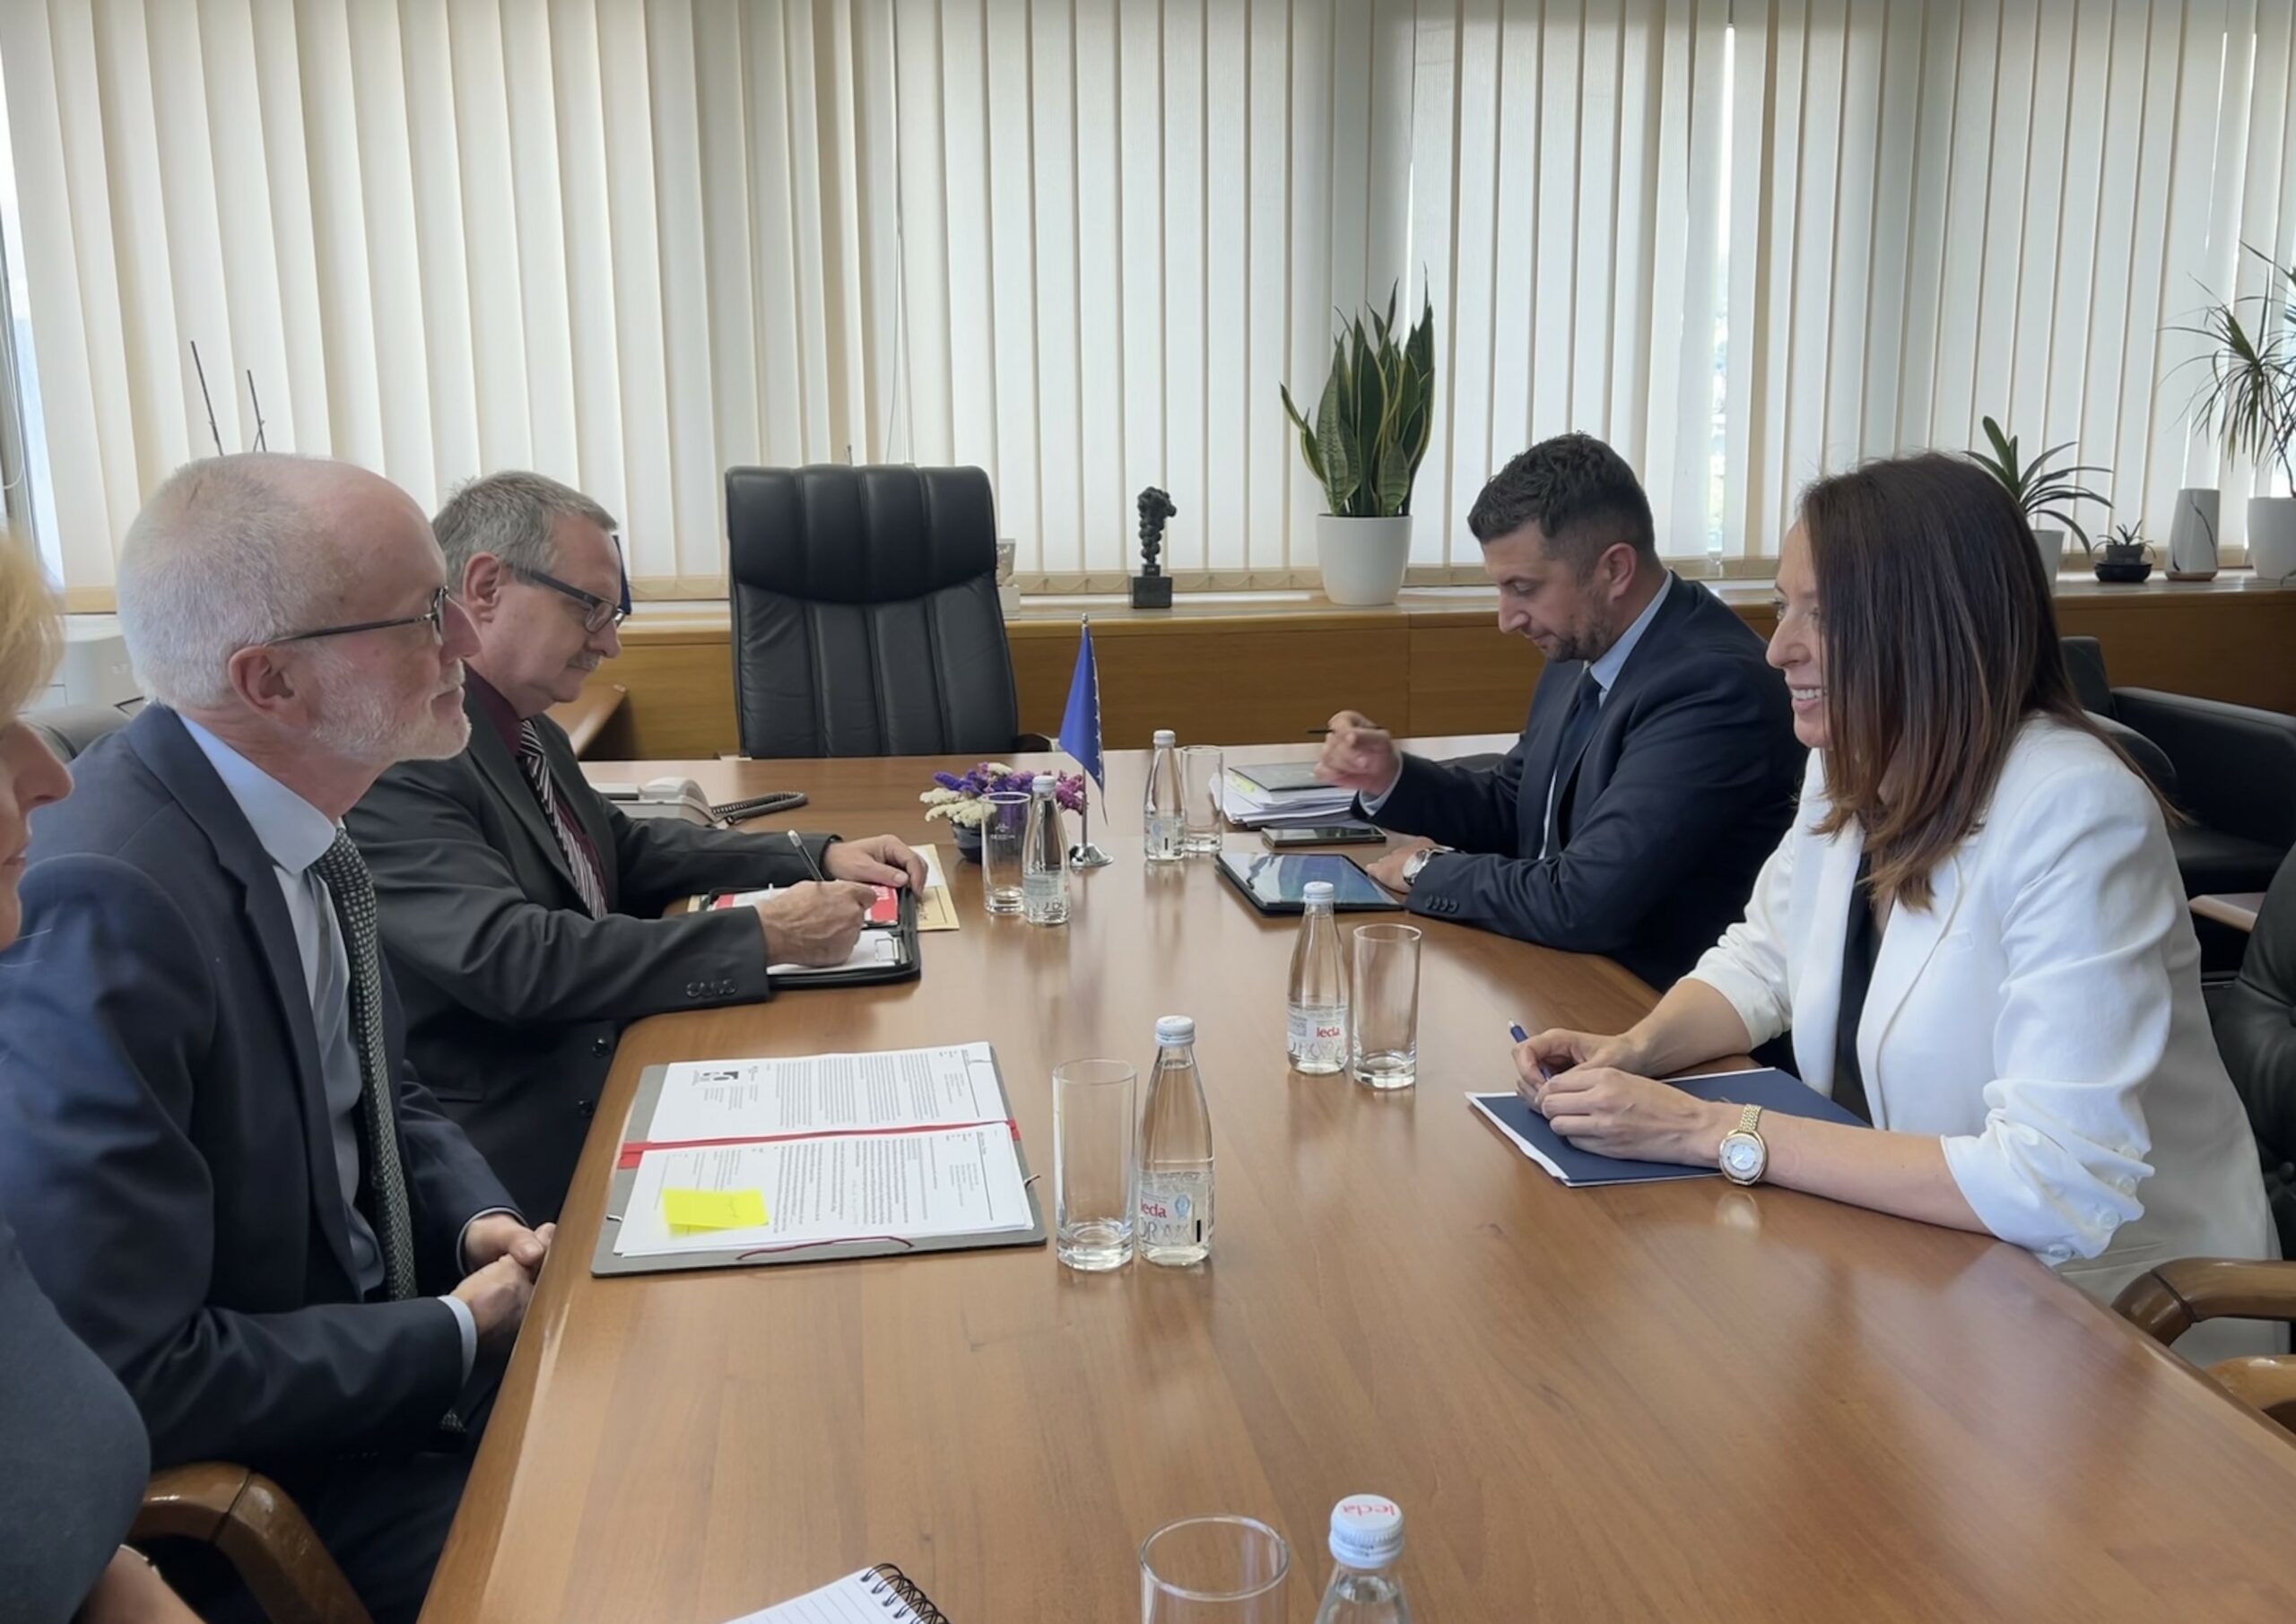 Minister of Civil Affairs of Bosnia and Herzegovina and Ambassador Fitschen confirmed their commitment to the demining process in Bosnia and Herzegovina